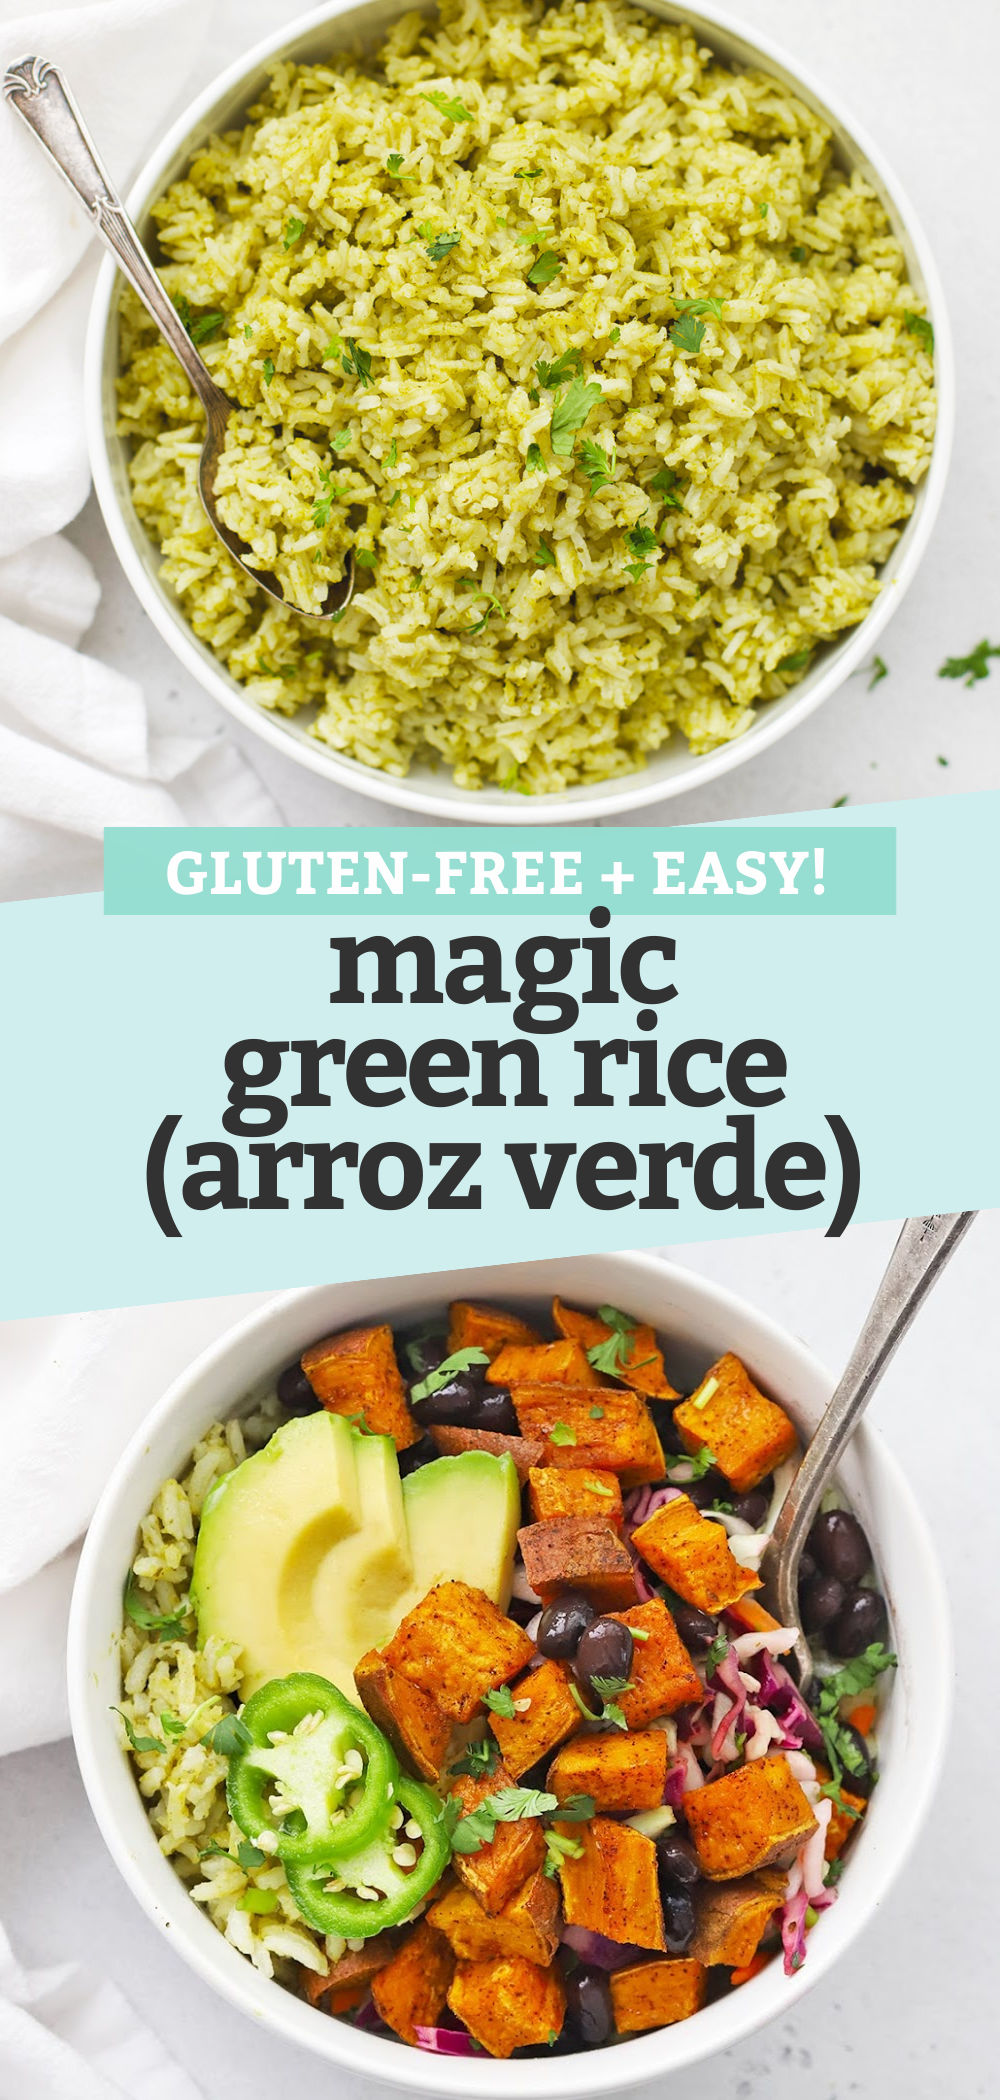 Collage of images of Mexican Green Rice (Arroz Verde) with a text overlay that reads "Gluten-Free + Easy Magic Green Rice (Arroz Verde)."